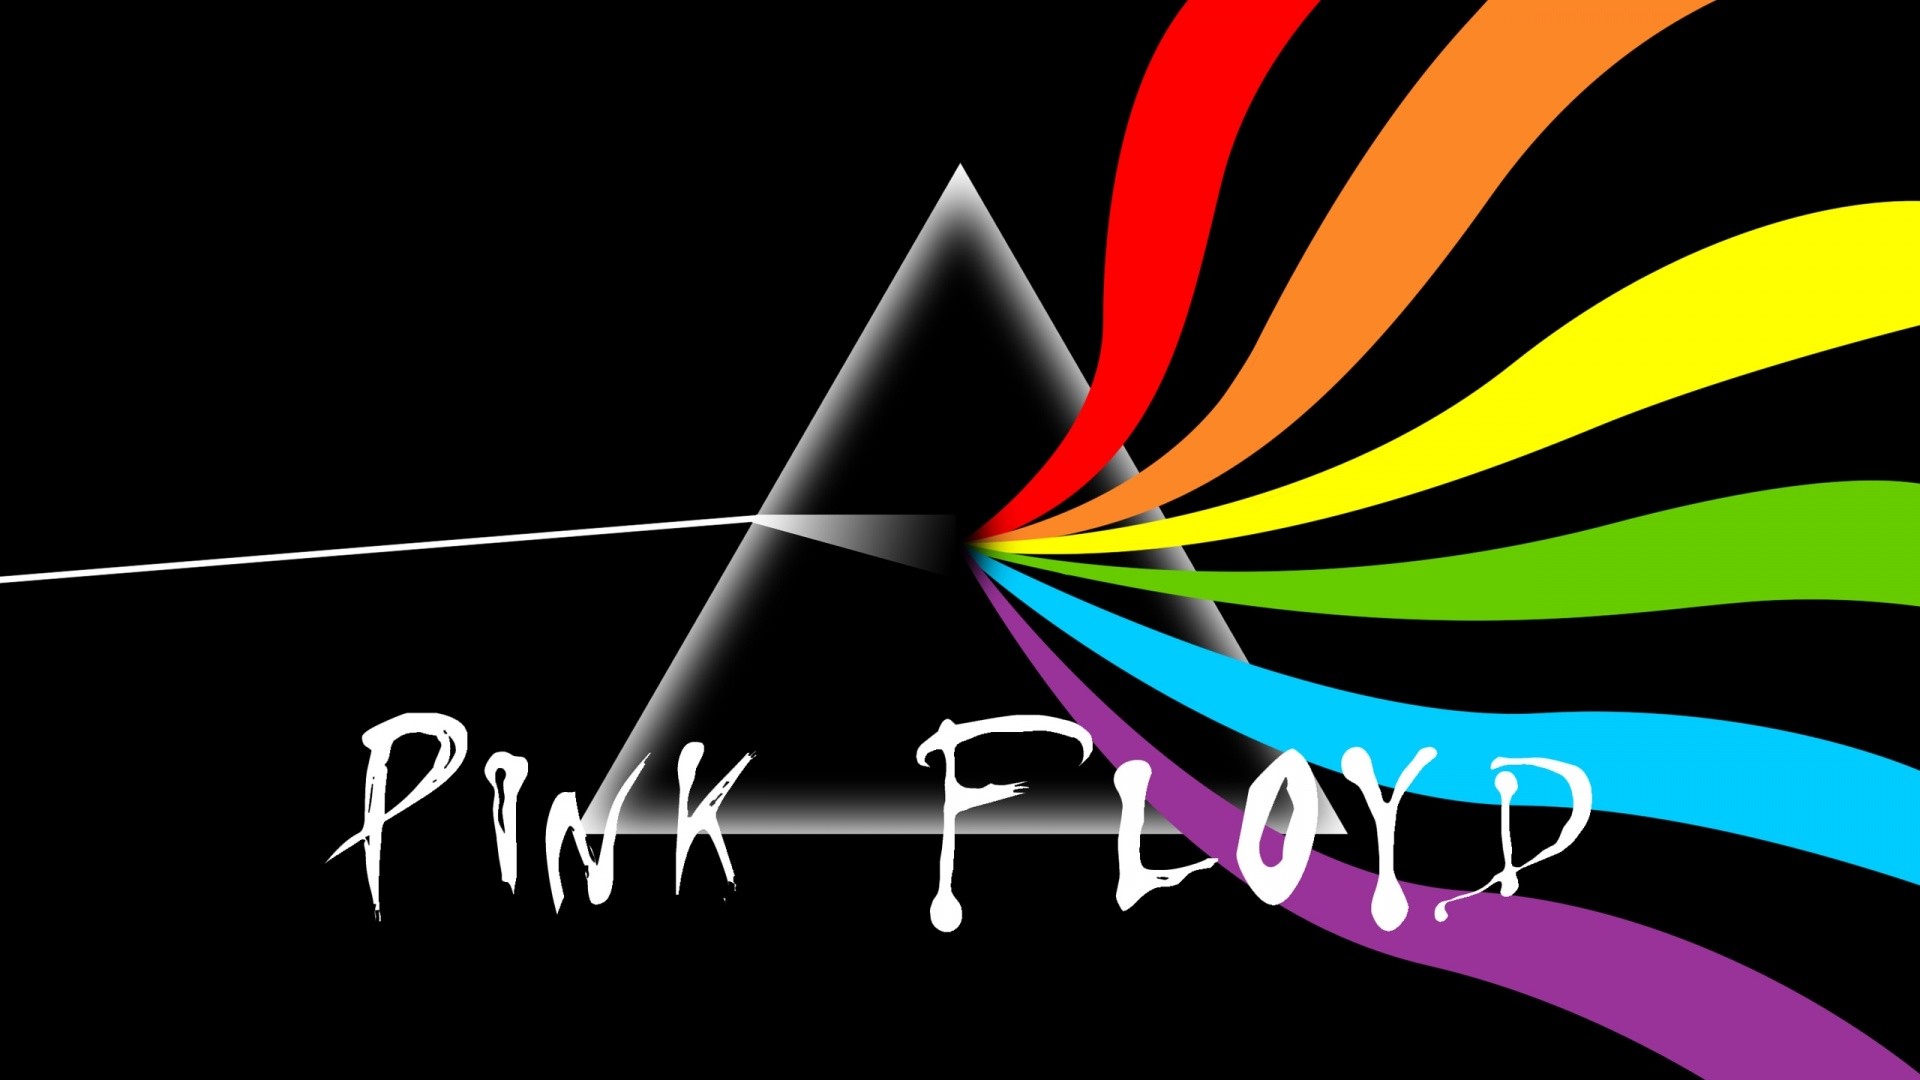 1920x1080 Pink Floyd Reportedly Set to Release New Album This Fall